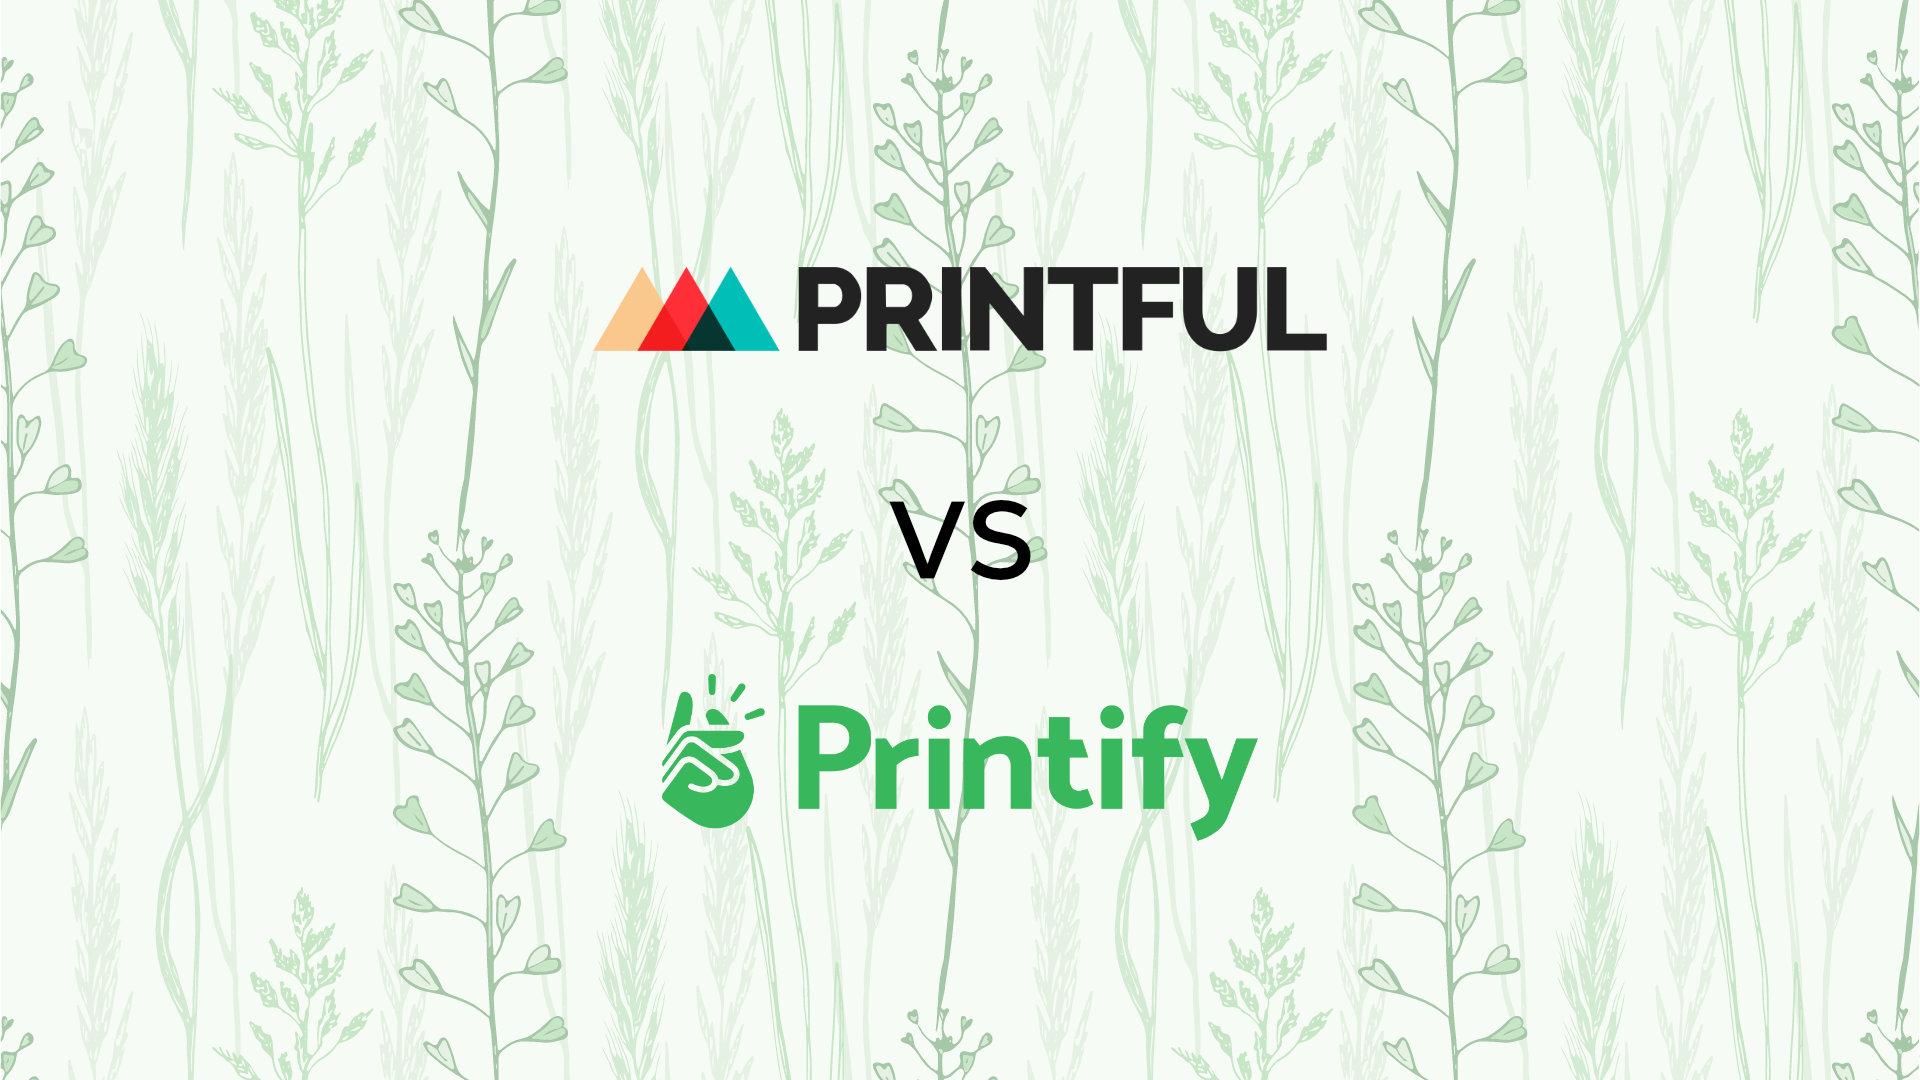 Printful vs Printify: Which is Better for Your Business?